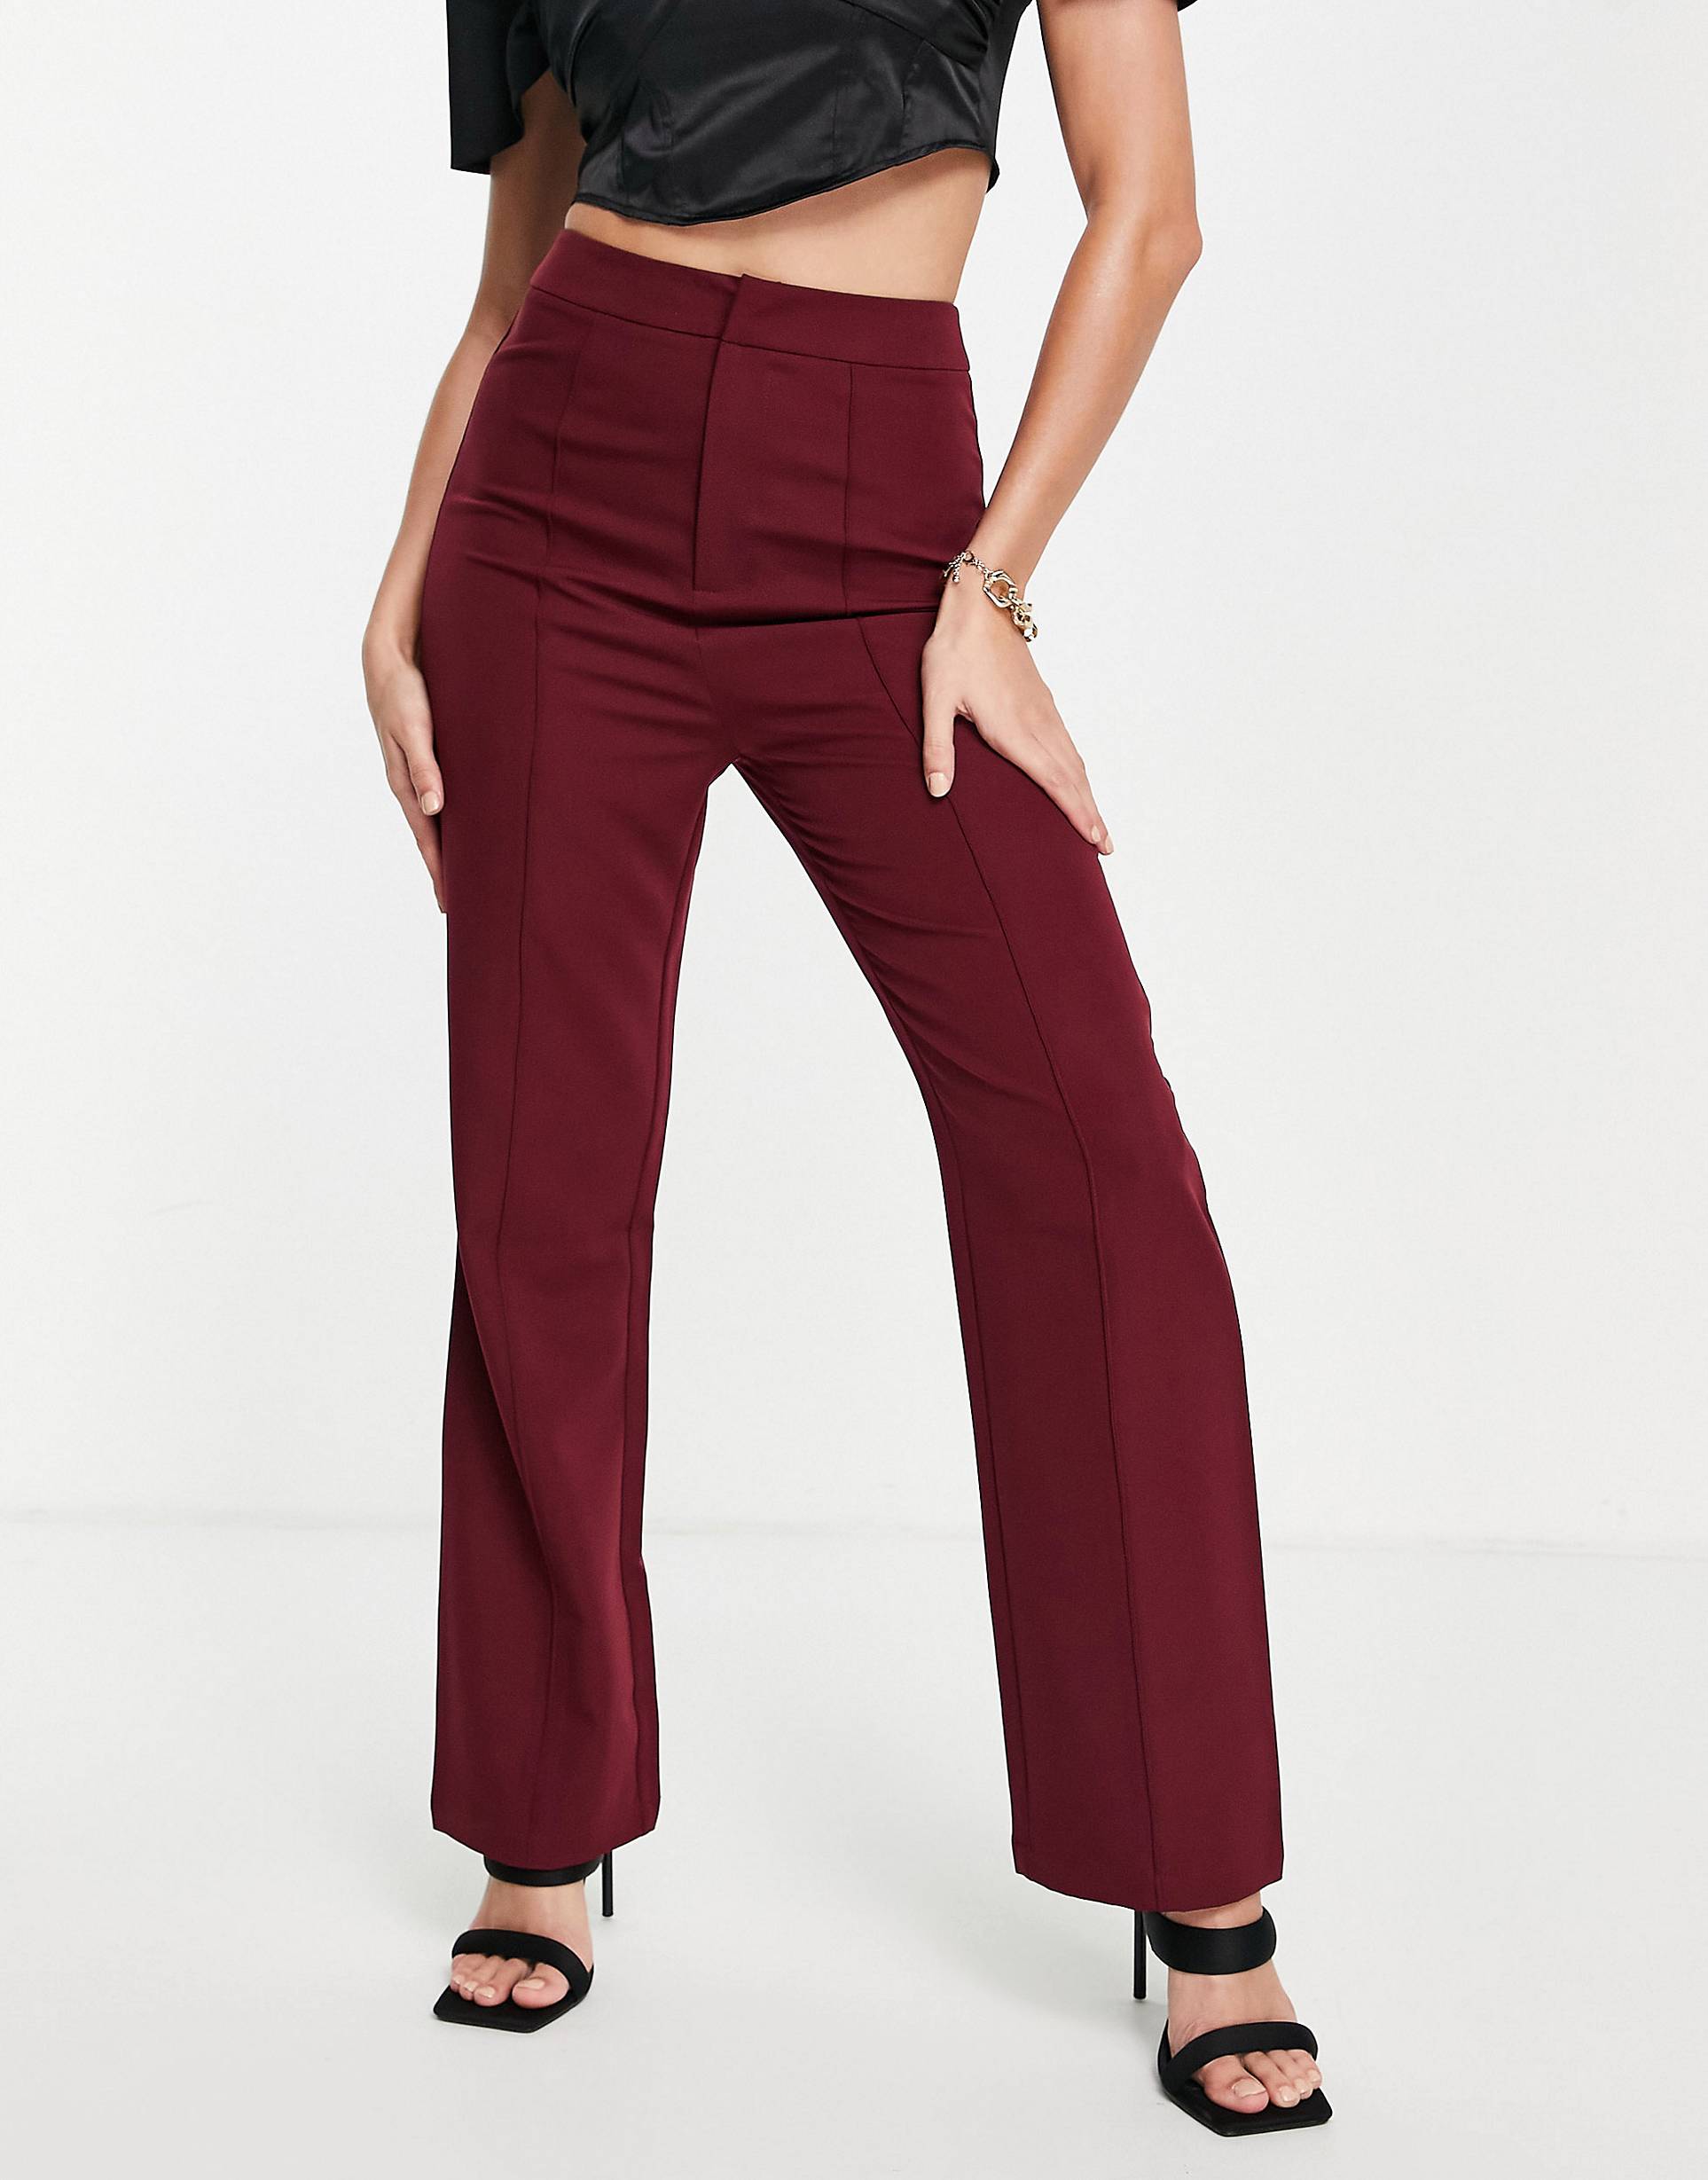 7 Chic Ways to Wear Red Pants in 2022 | Who What Wear